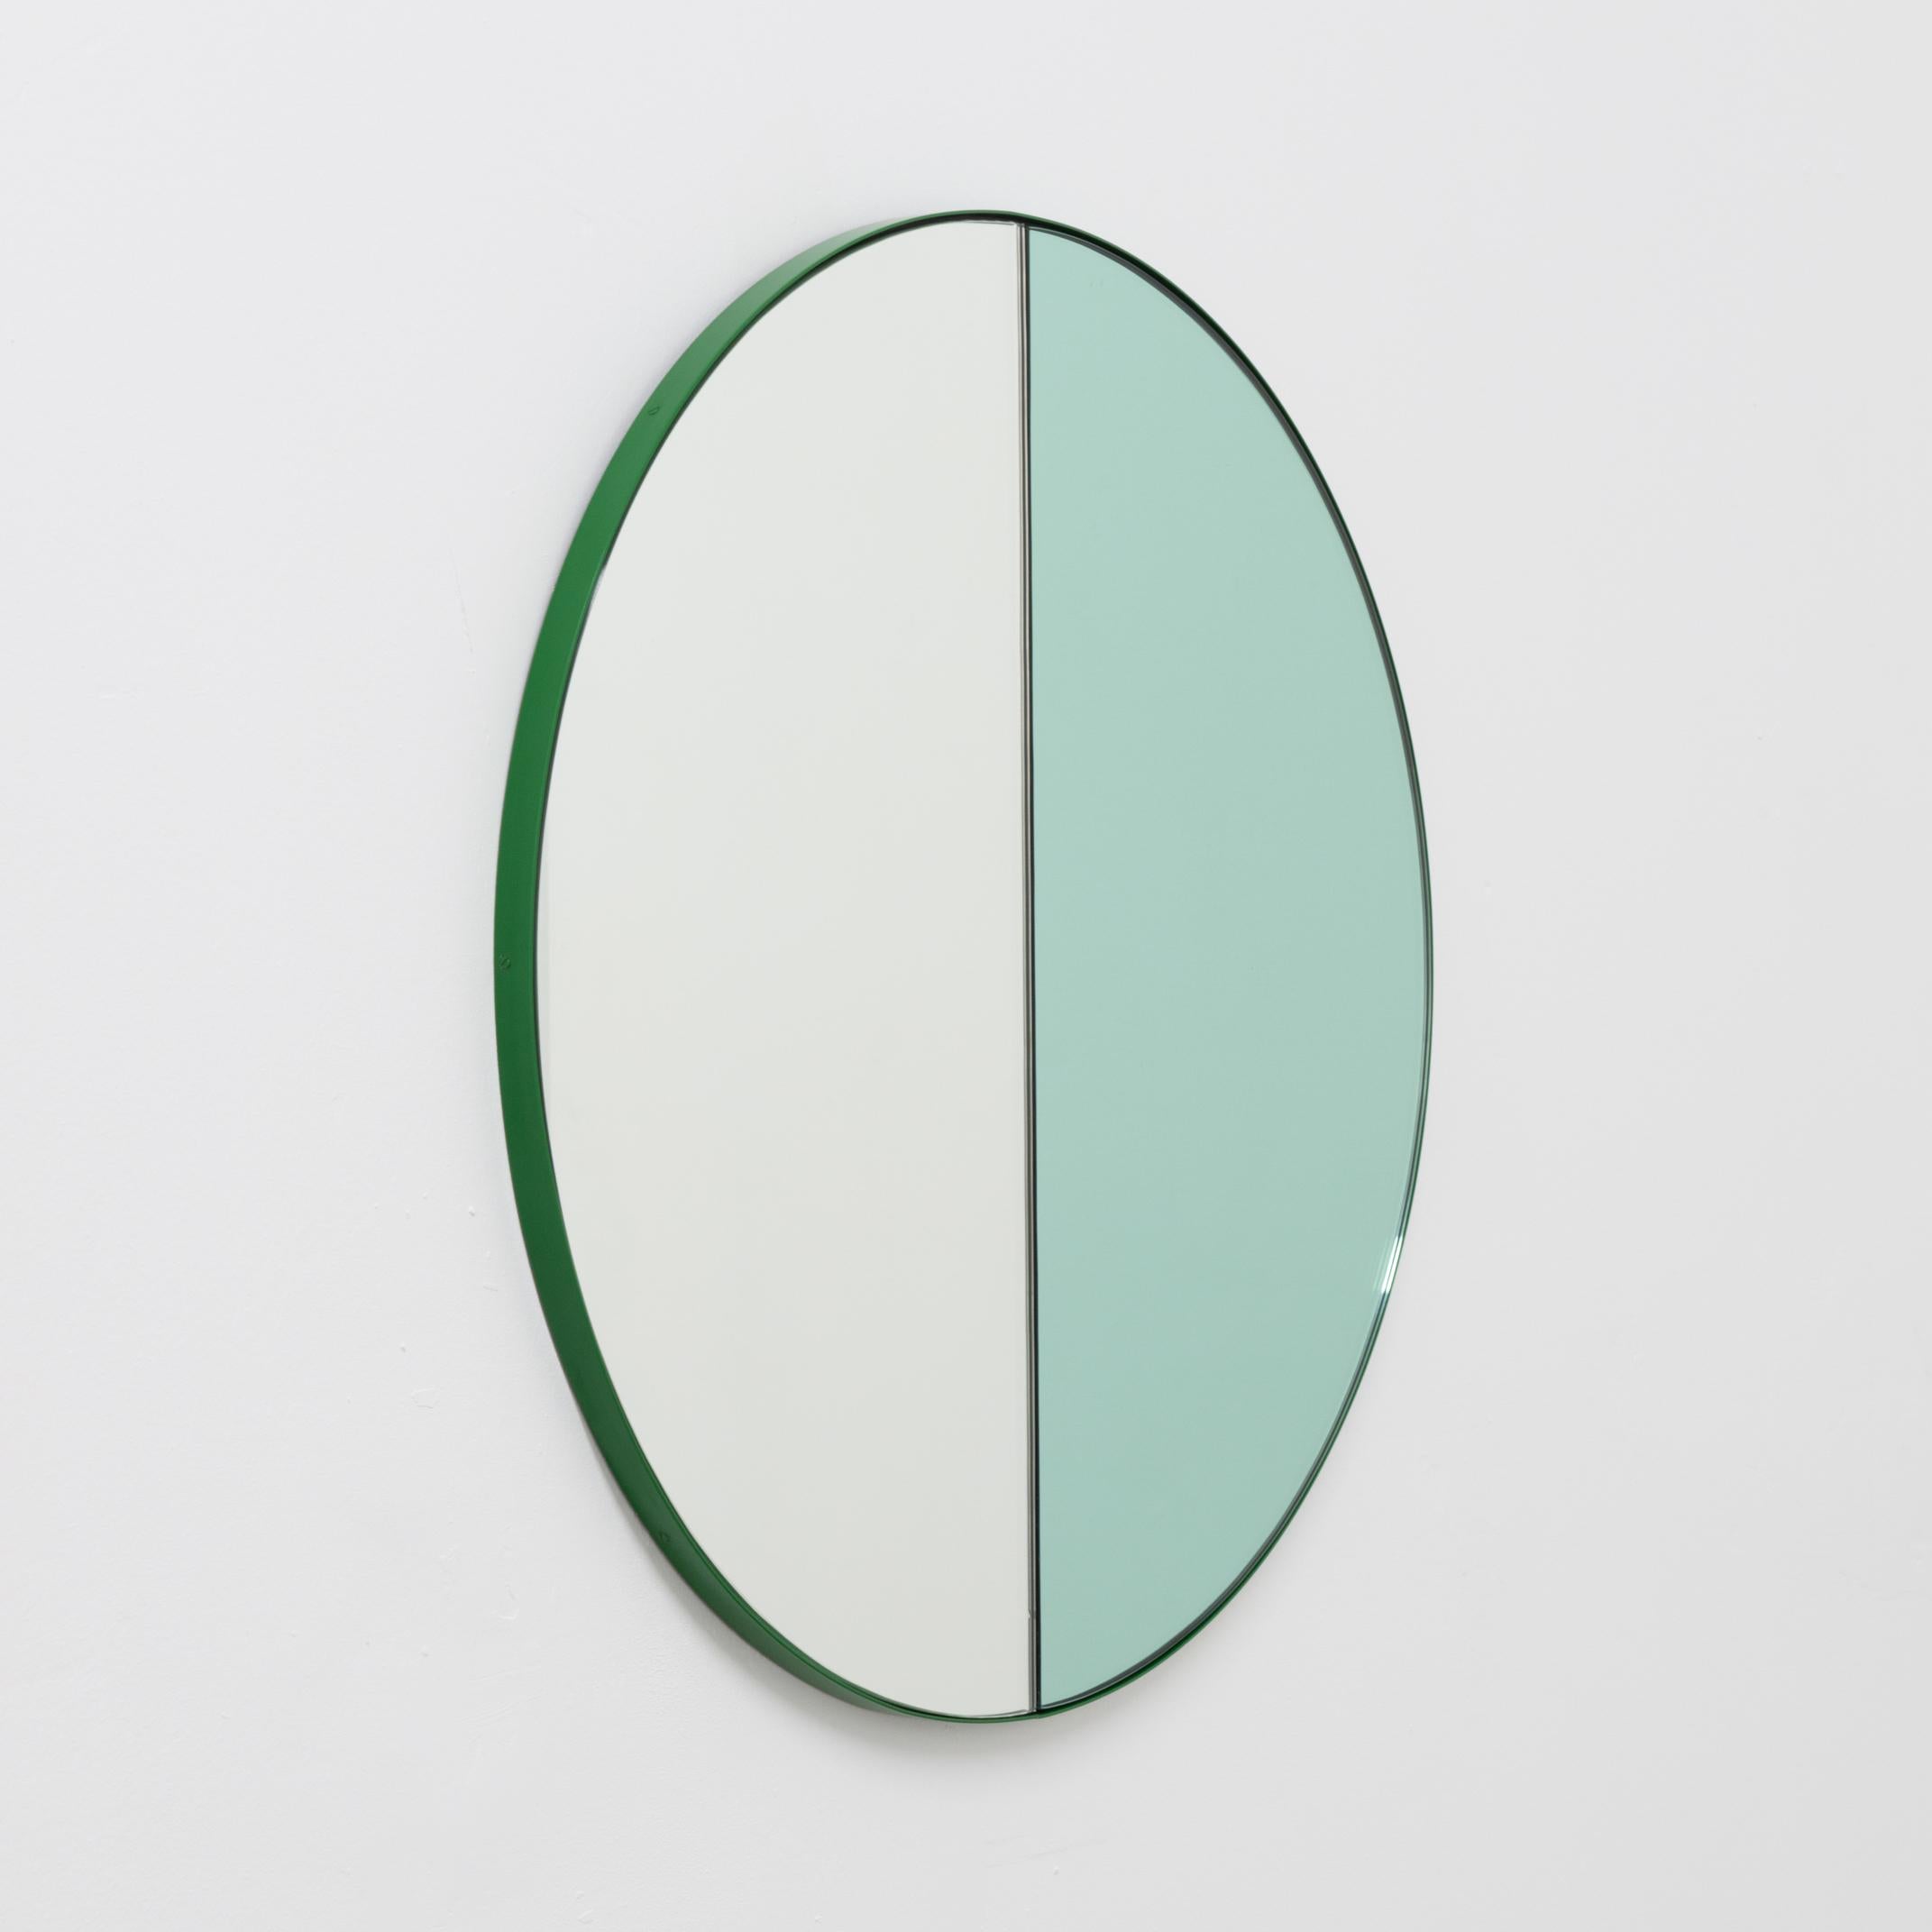 Delightful handcrafted mixed tinted (silver & green) Orbis Dualis mirror with a modern green frame.

Designed and handcrafted in London, UK. The detailing and finish, including visible screws, emphasize the craft and quality feel of the mirror, a